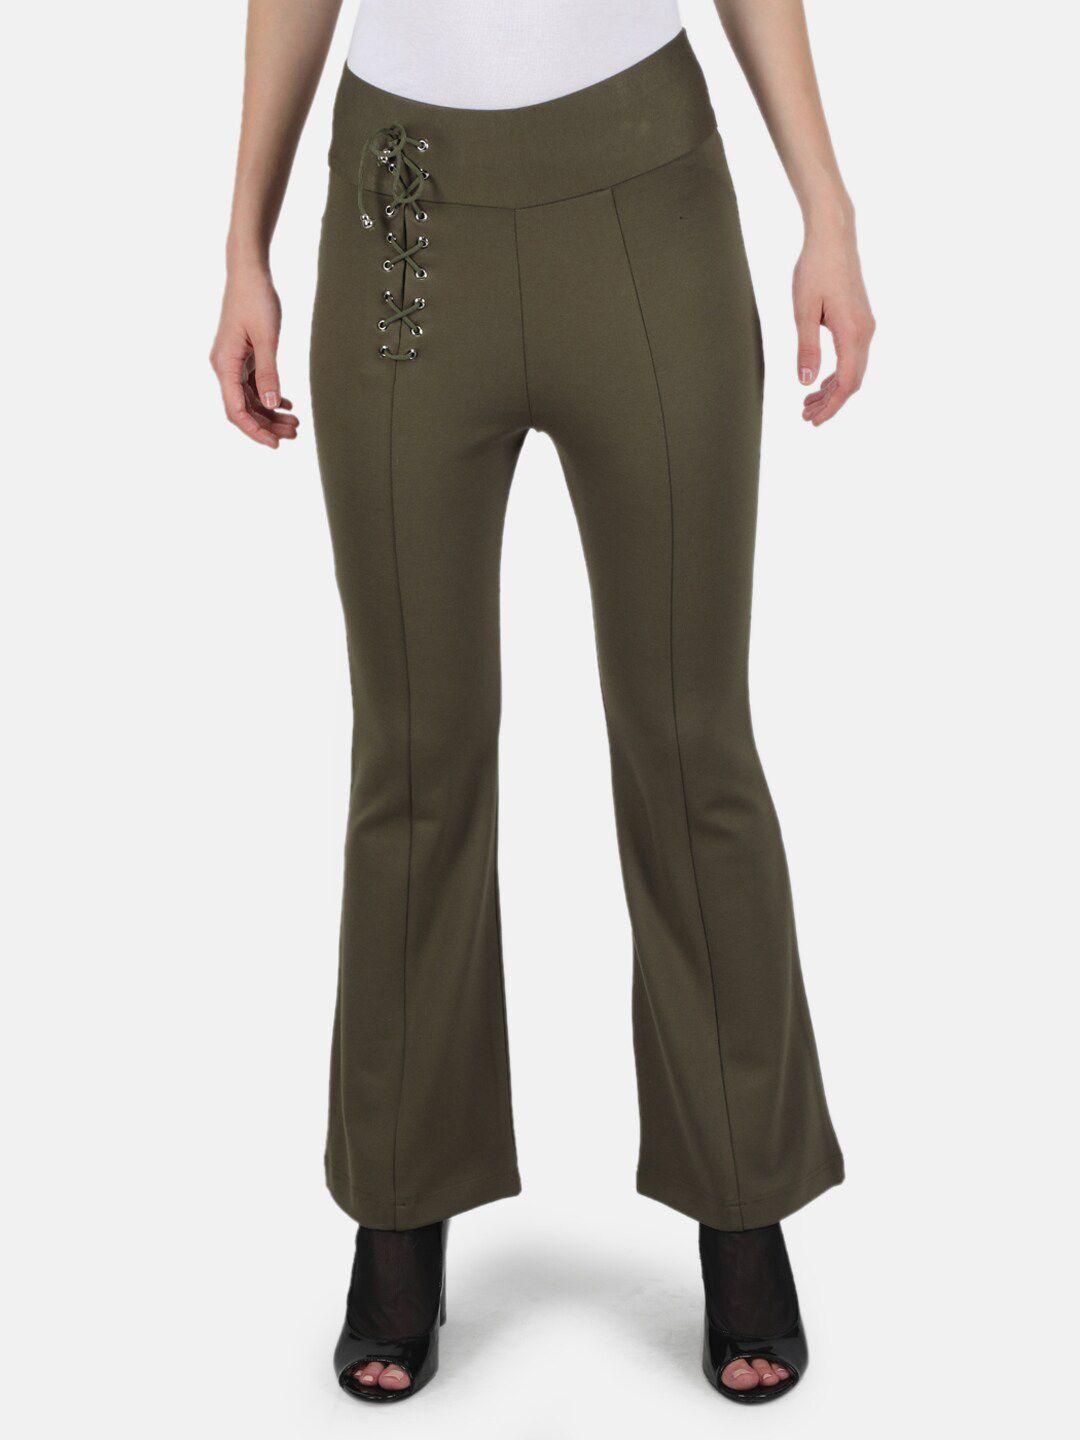 monte-carlo-women-olive-green-solid-jeggings